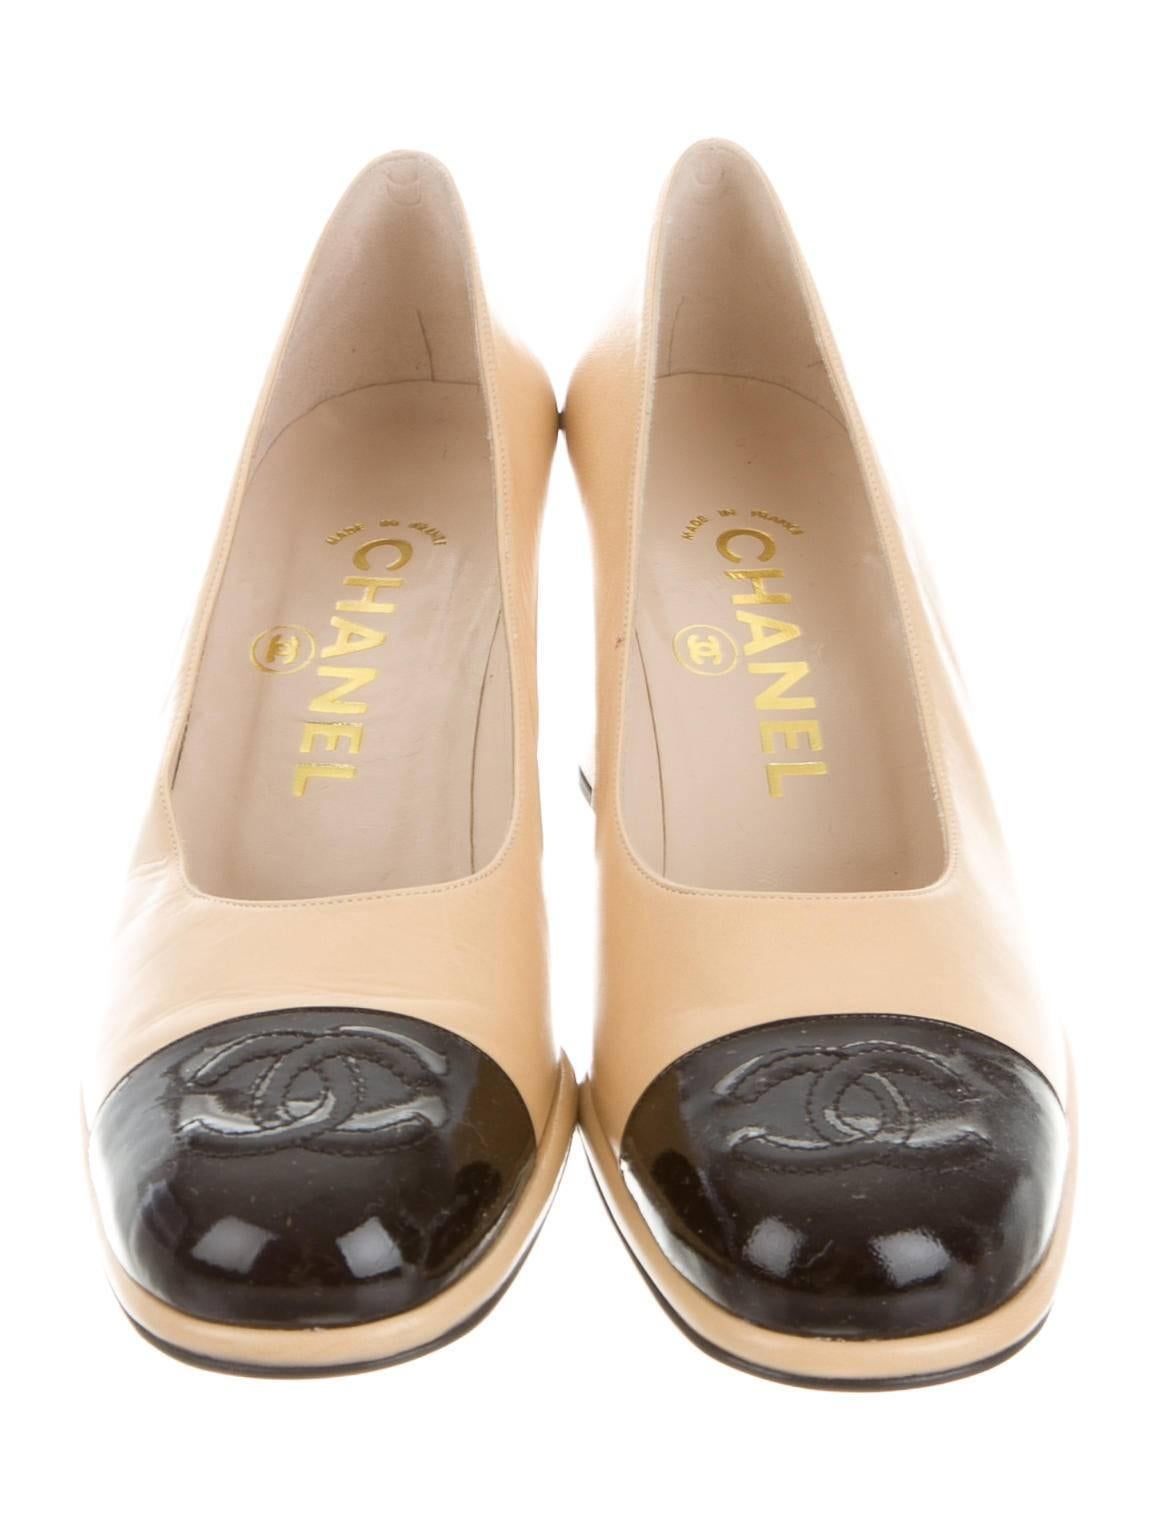 CURATOR'S NOTES

Chanel NEW Beige Black Cap Toe Leather Patent CC Block Heels Pumps in Box  

Size IT 37
Leather
Patent leather
Leather lining
Made in France
Heel height 2.5"
​Includes original Chanel box